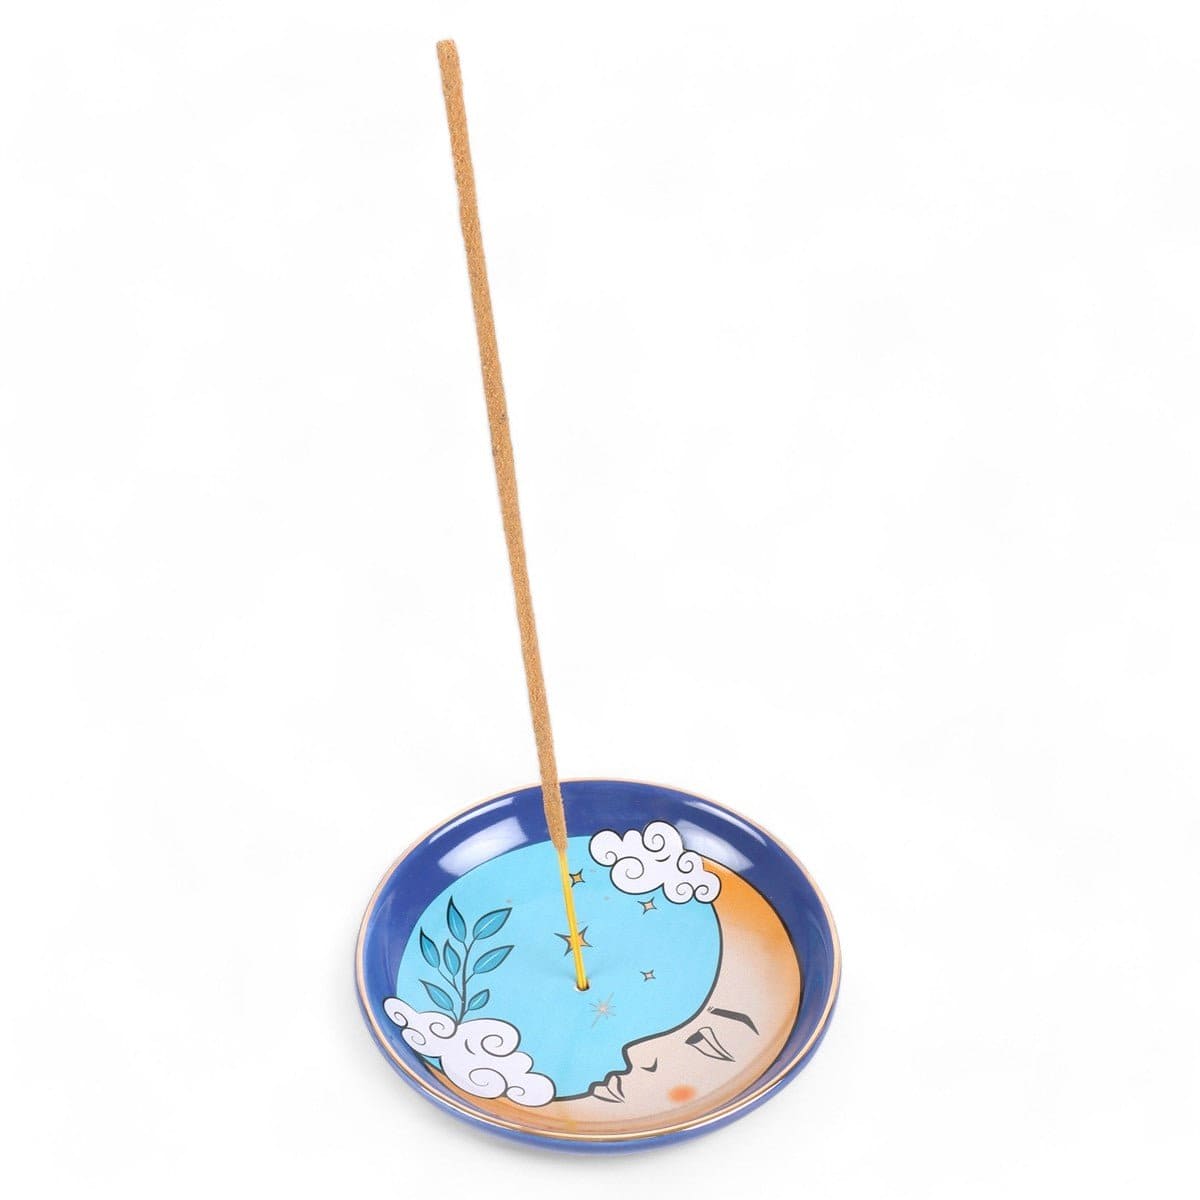 The Moon Celestial Incense Holder - Incense Holders by Spirit of equinox